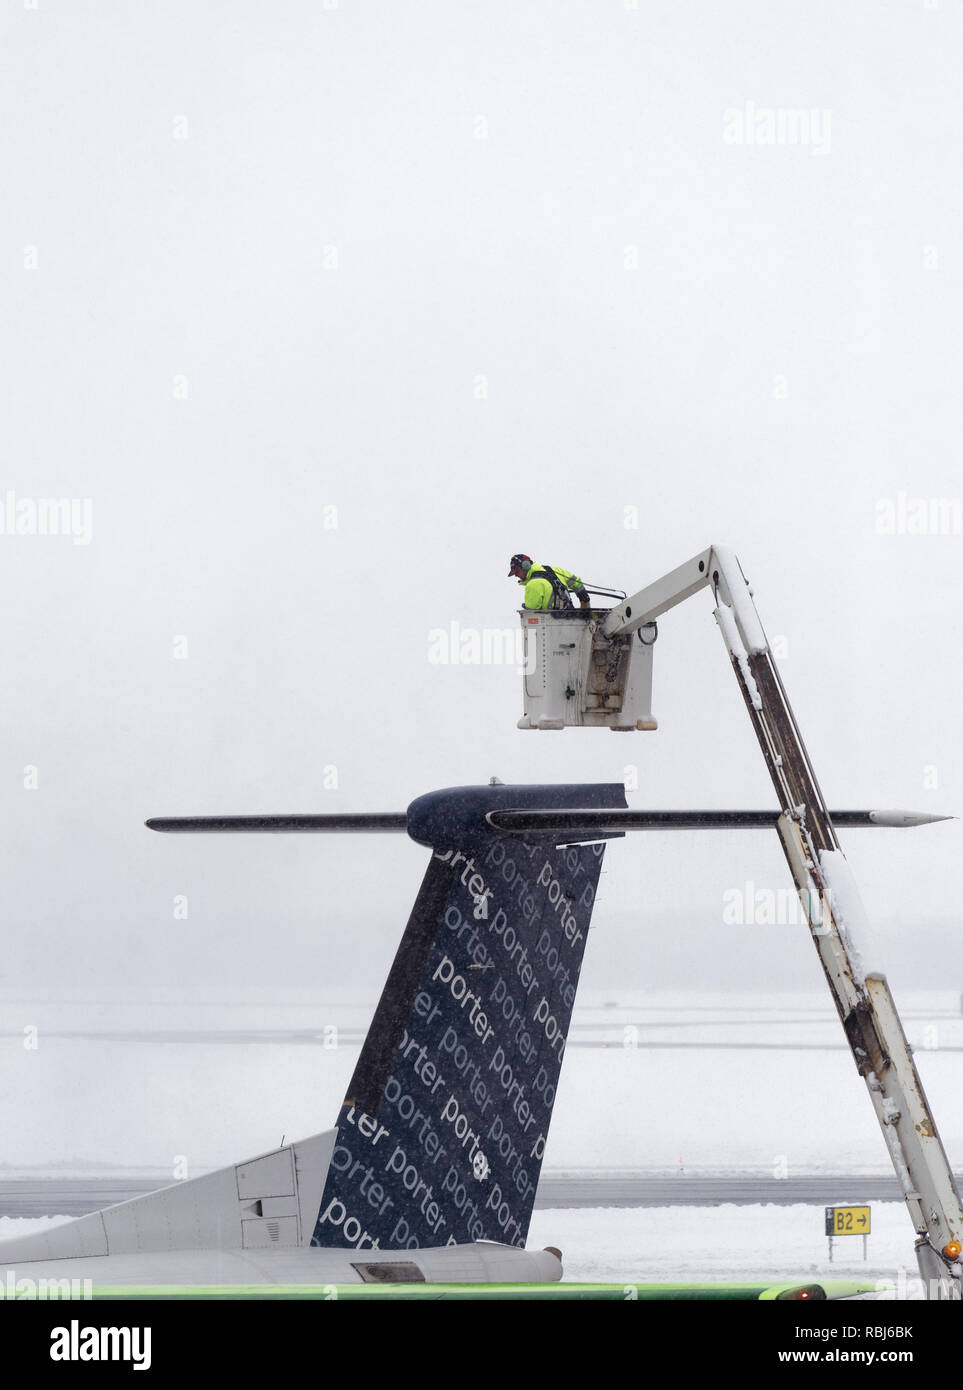 An aiport employee spraying de-icer on an aircraft's wings in winter, getting the plane ready for departure. Quebec City Jean Lesage airport. Stock Photo